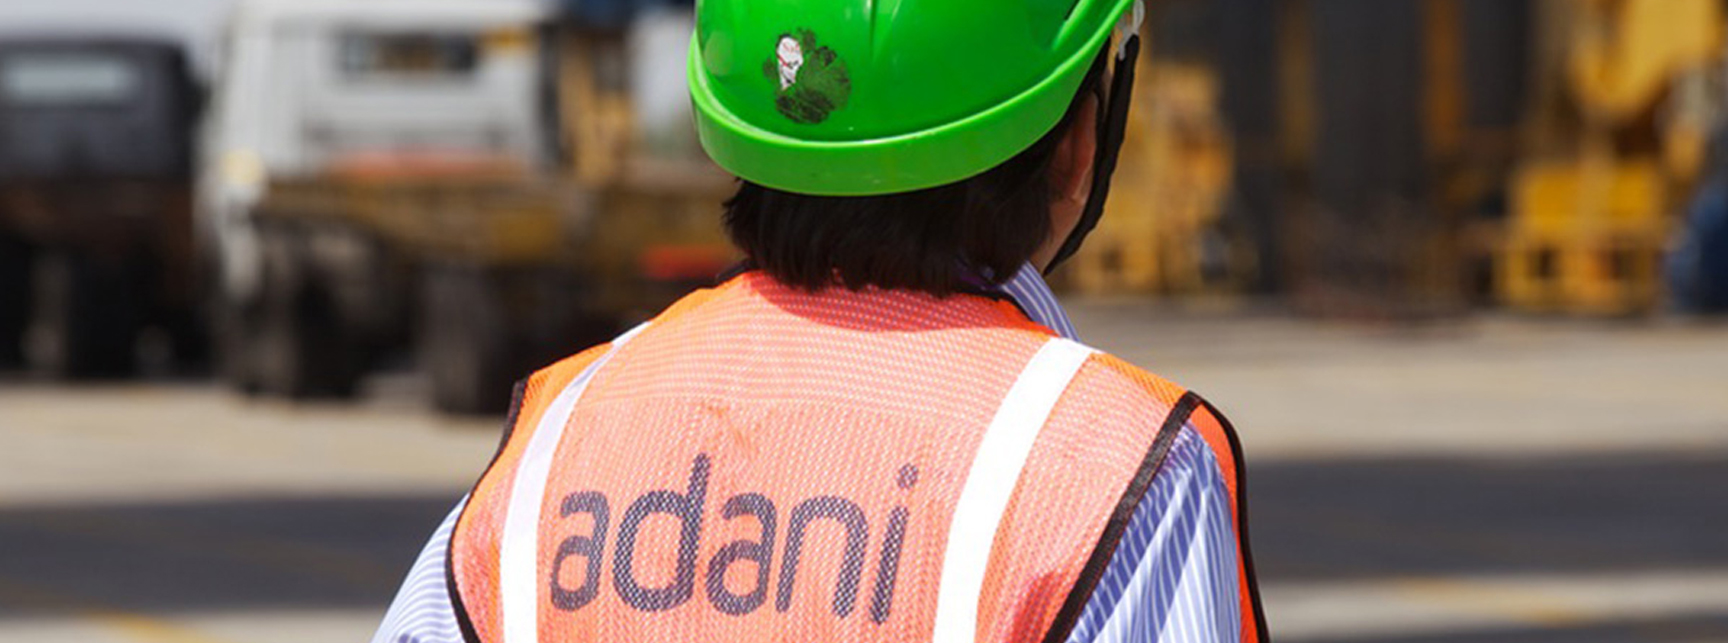 Health and Safety | Adani Transmission